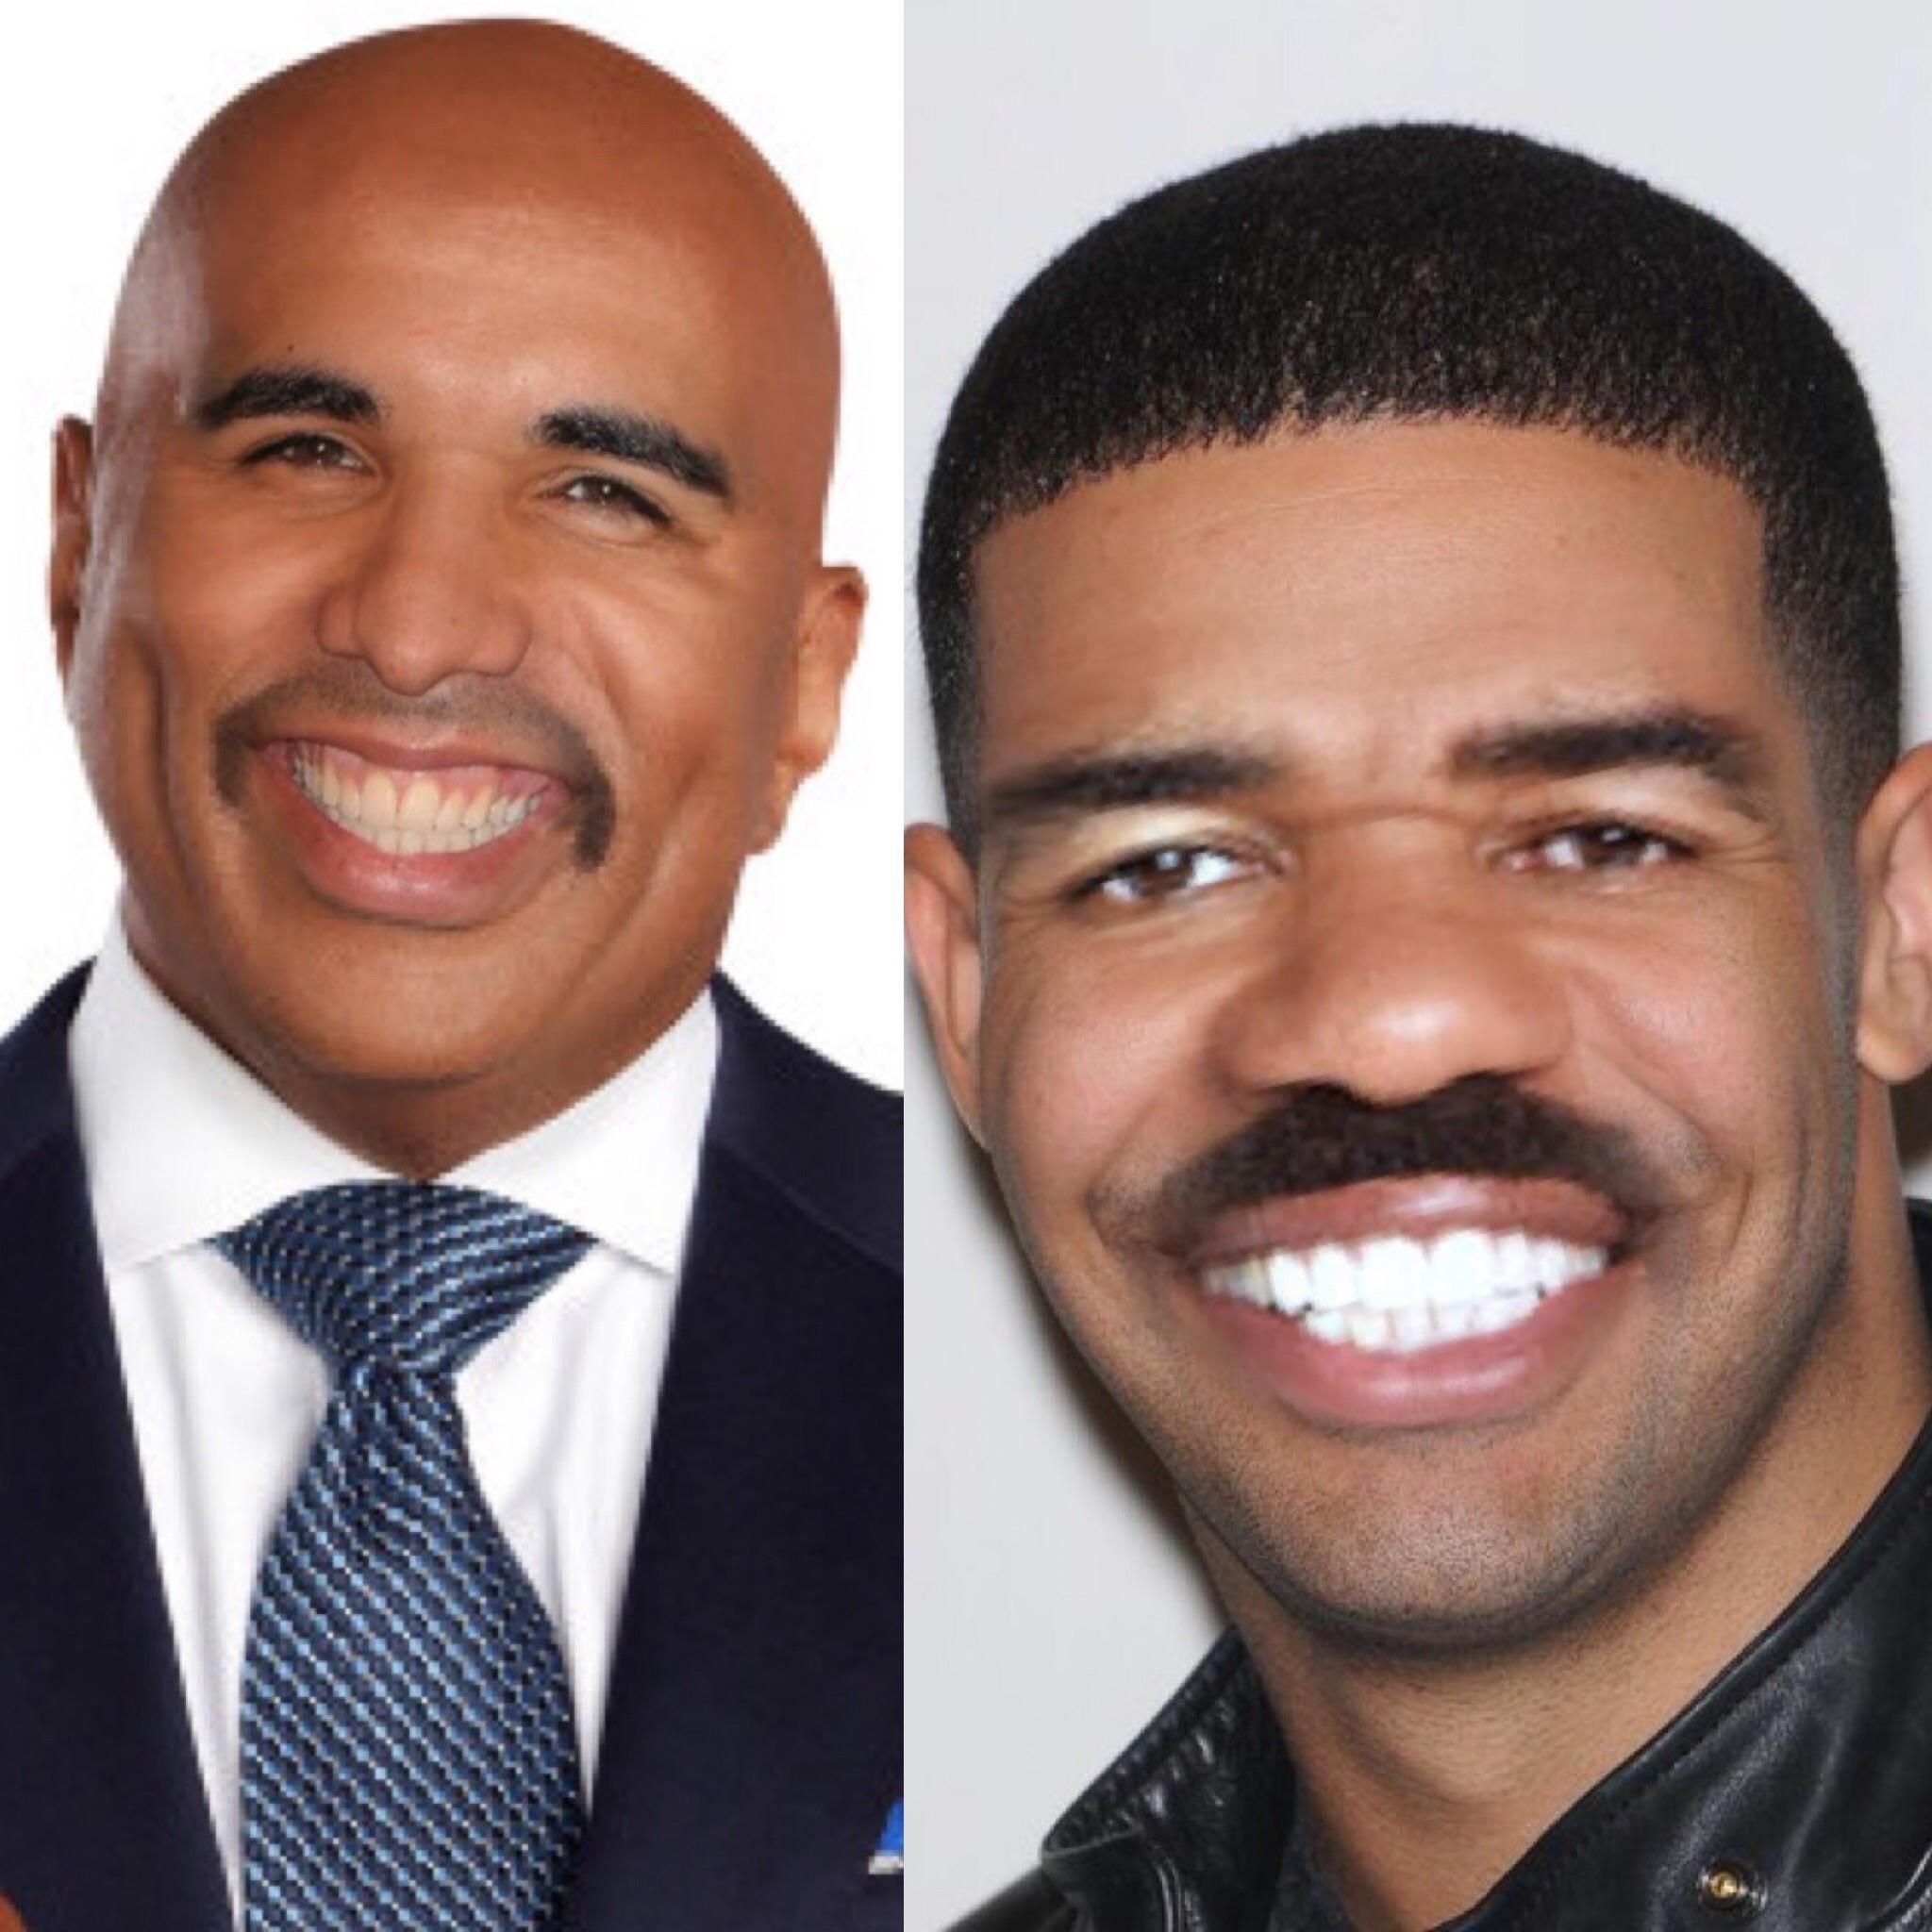 So I did a face swap with Drake and Steve Harvey...